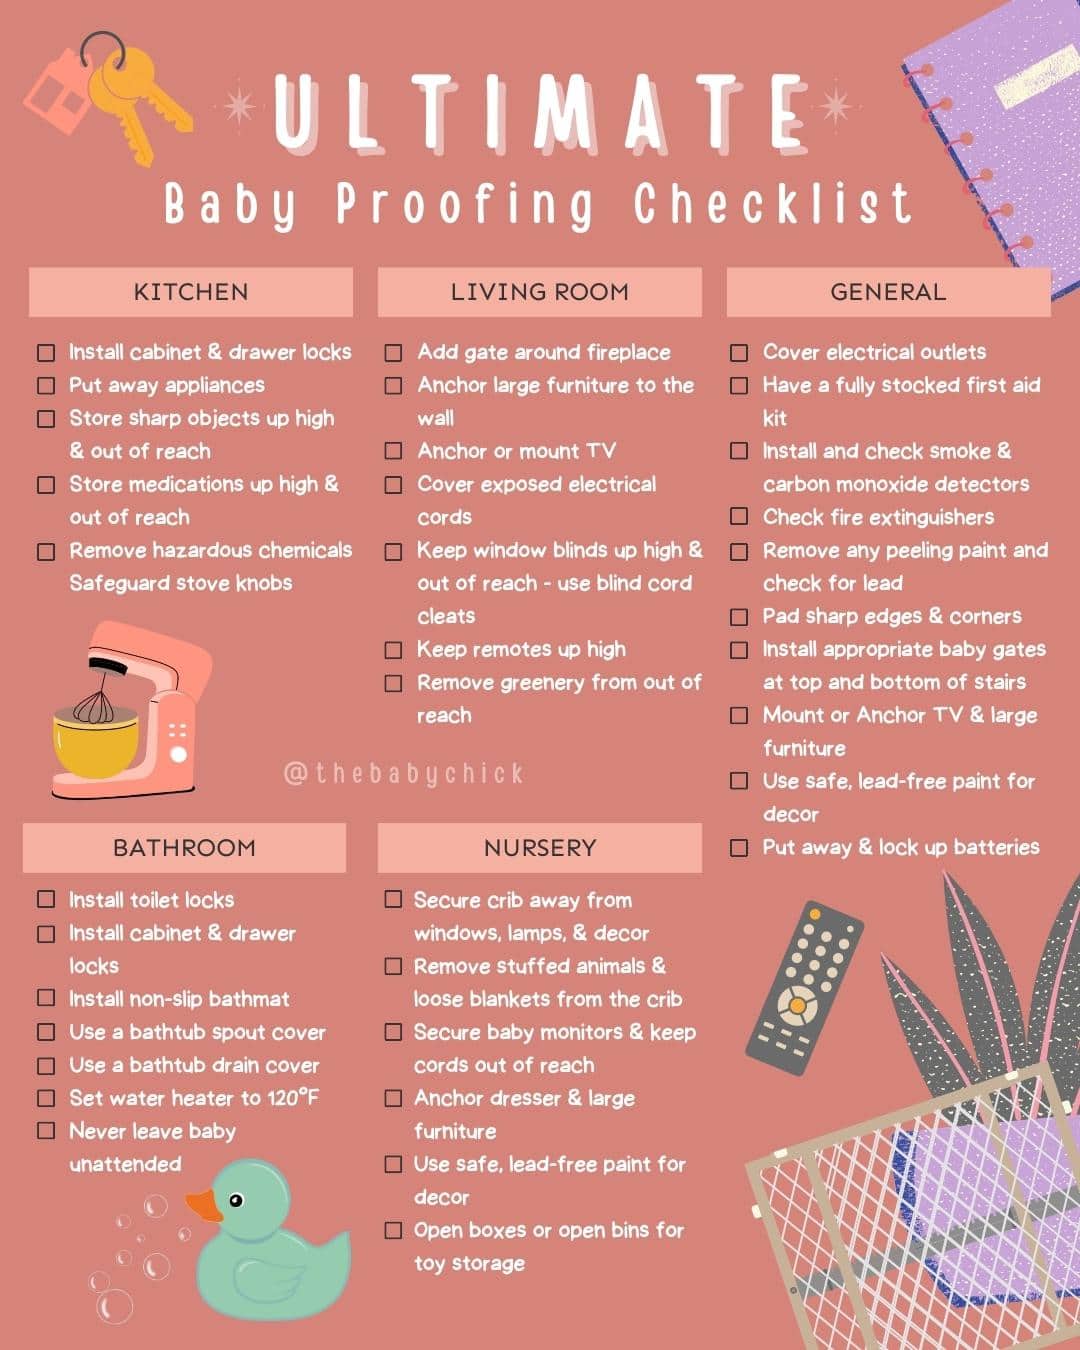 A checklist that lists everything parents need to consider when baby proofing their house